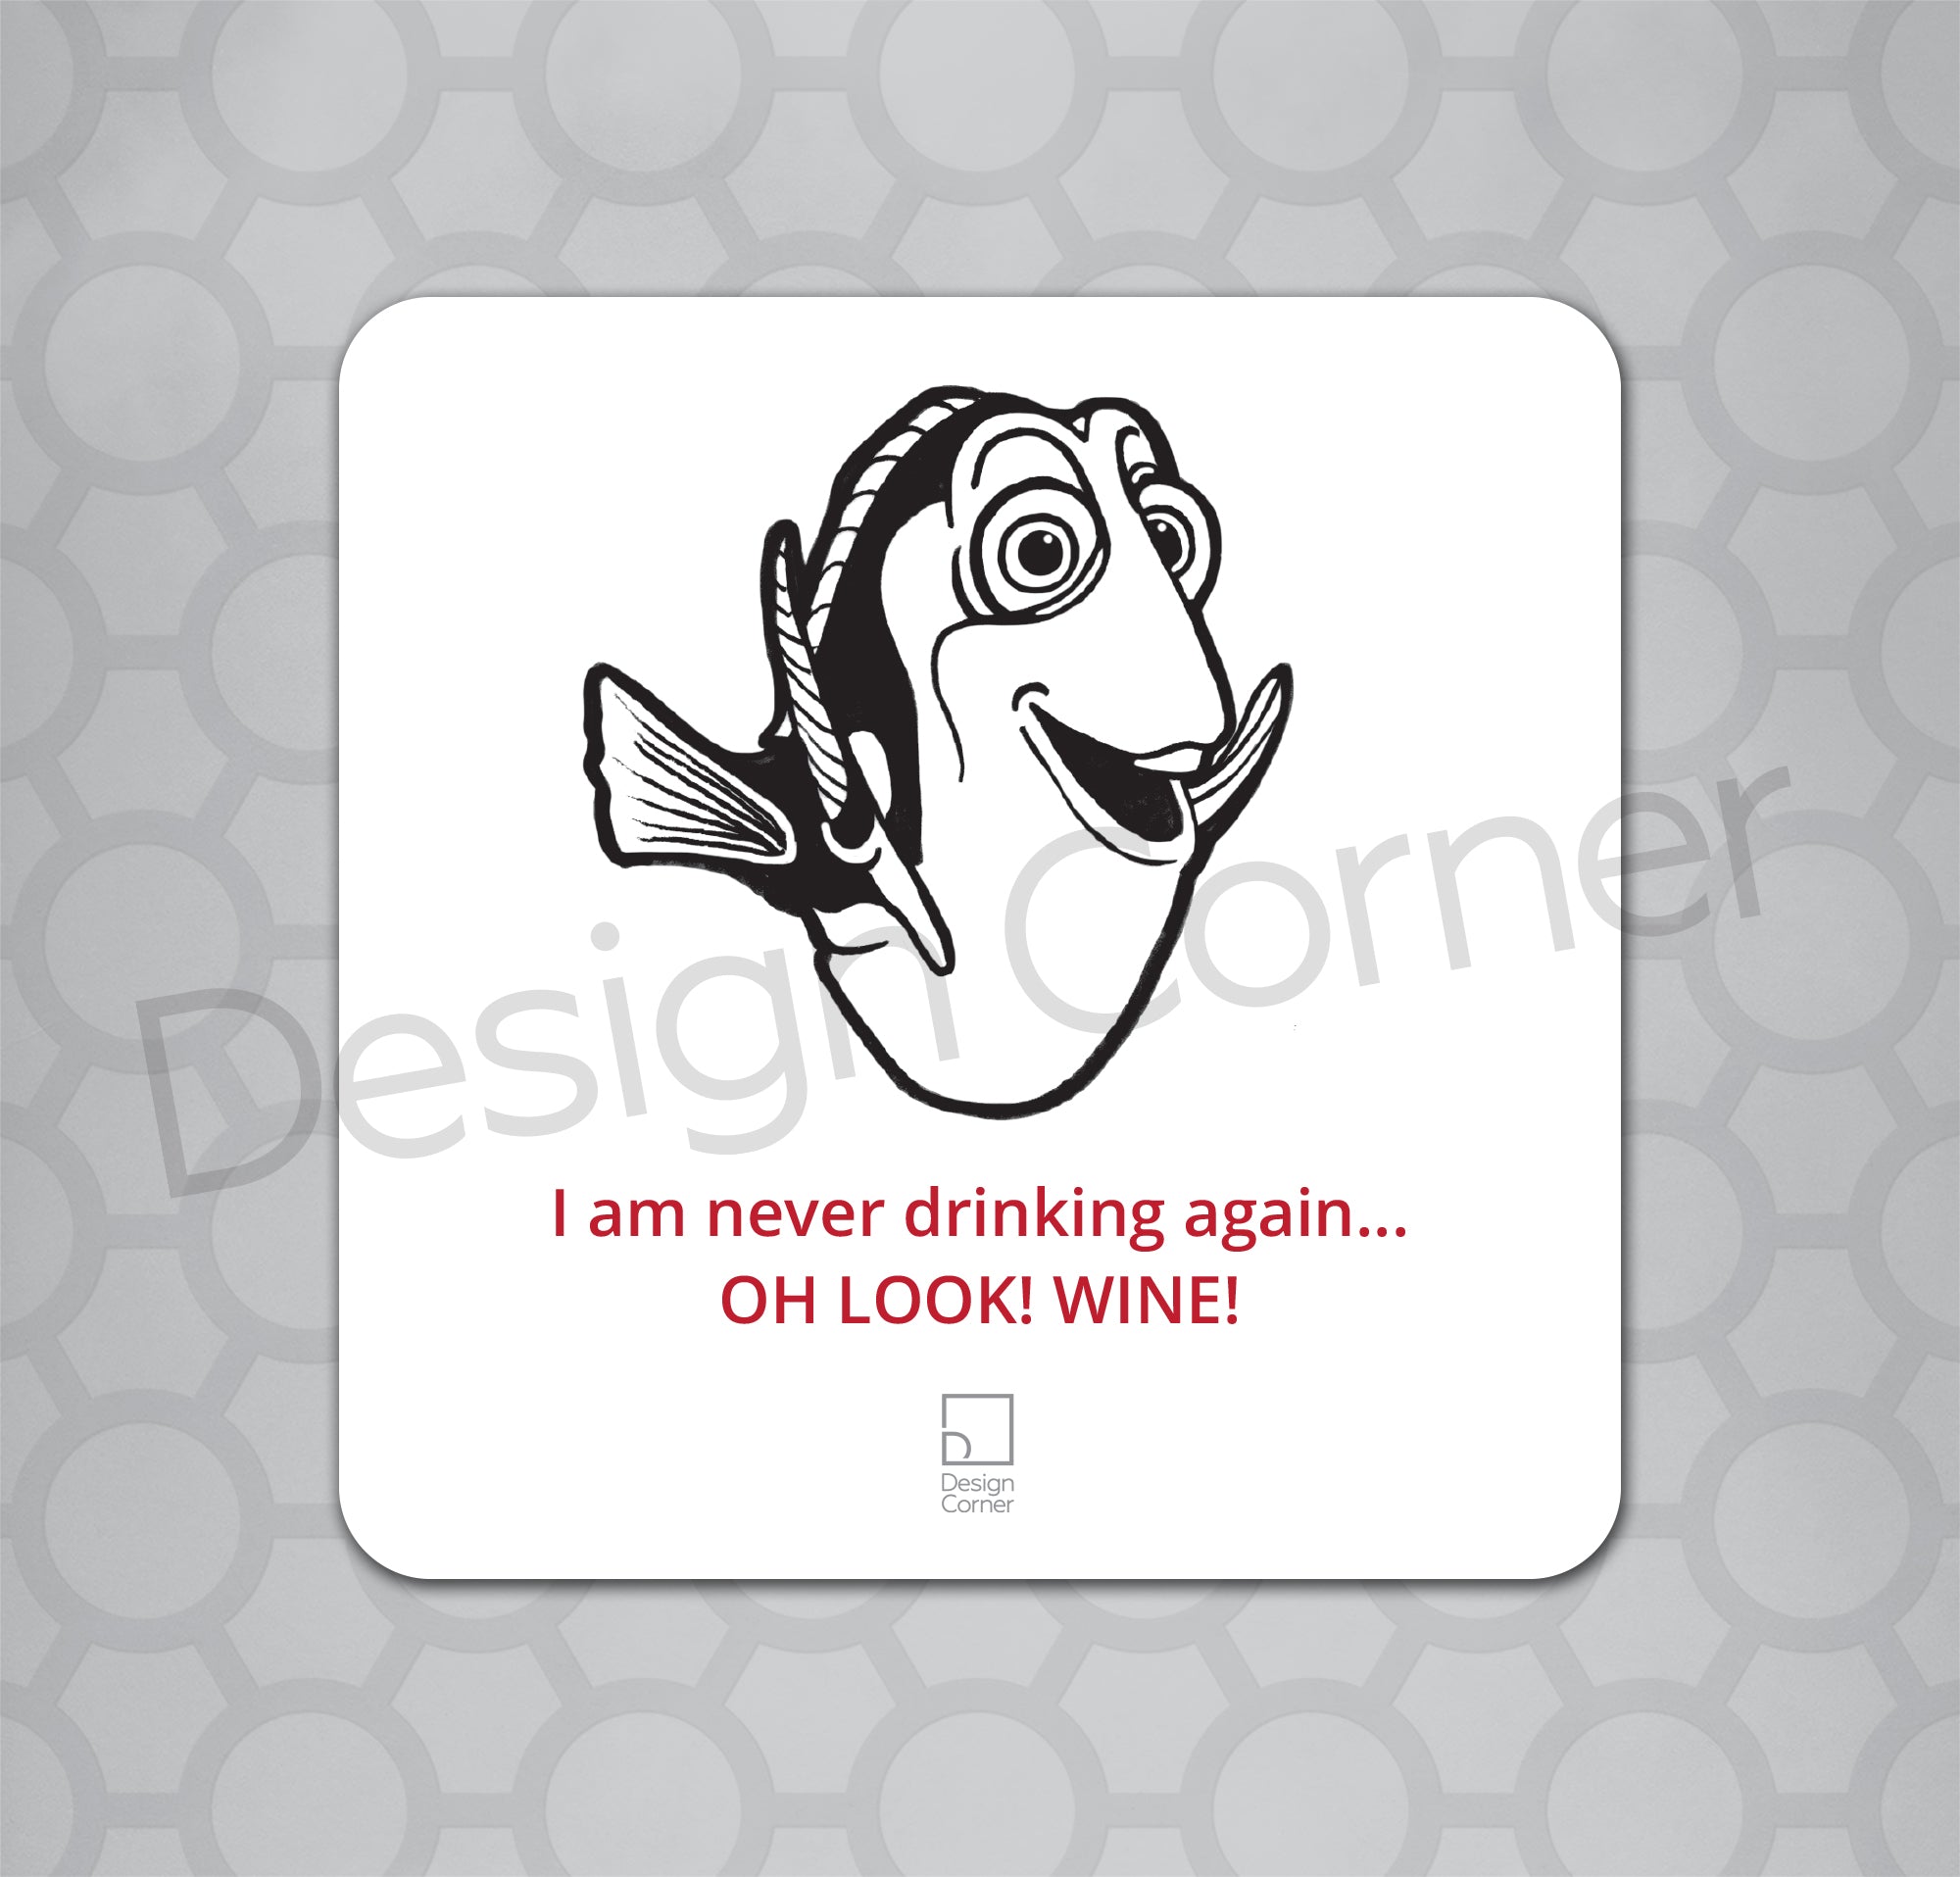 Illustration of Dory on a coaster with caption "I am never drinking again. Oh Look! wine!"